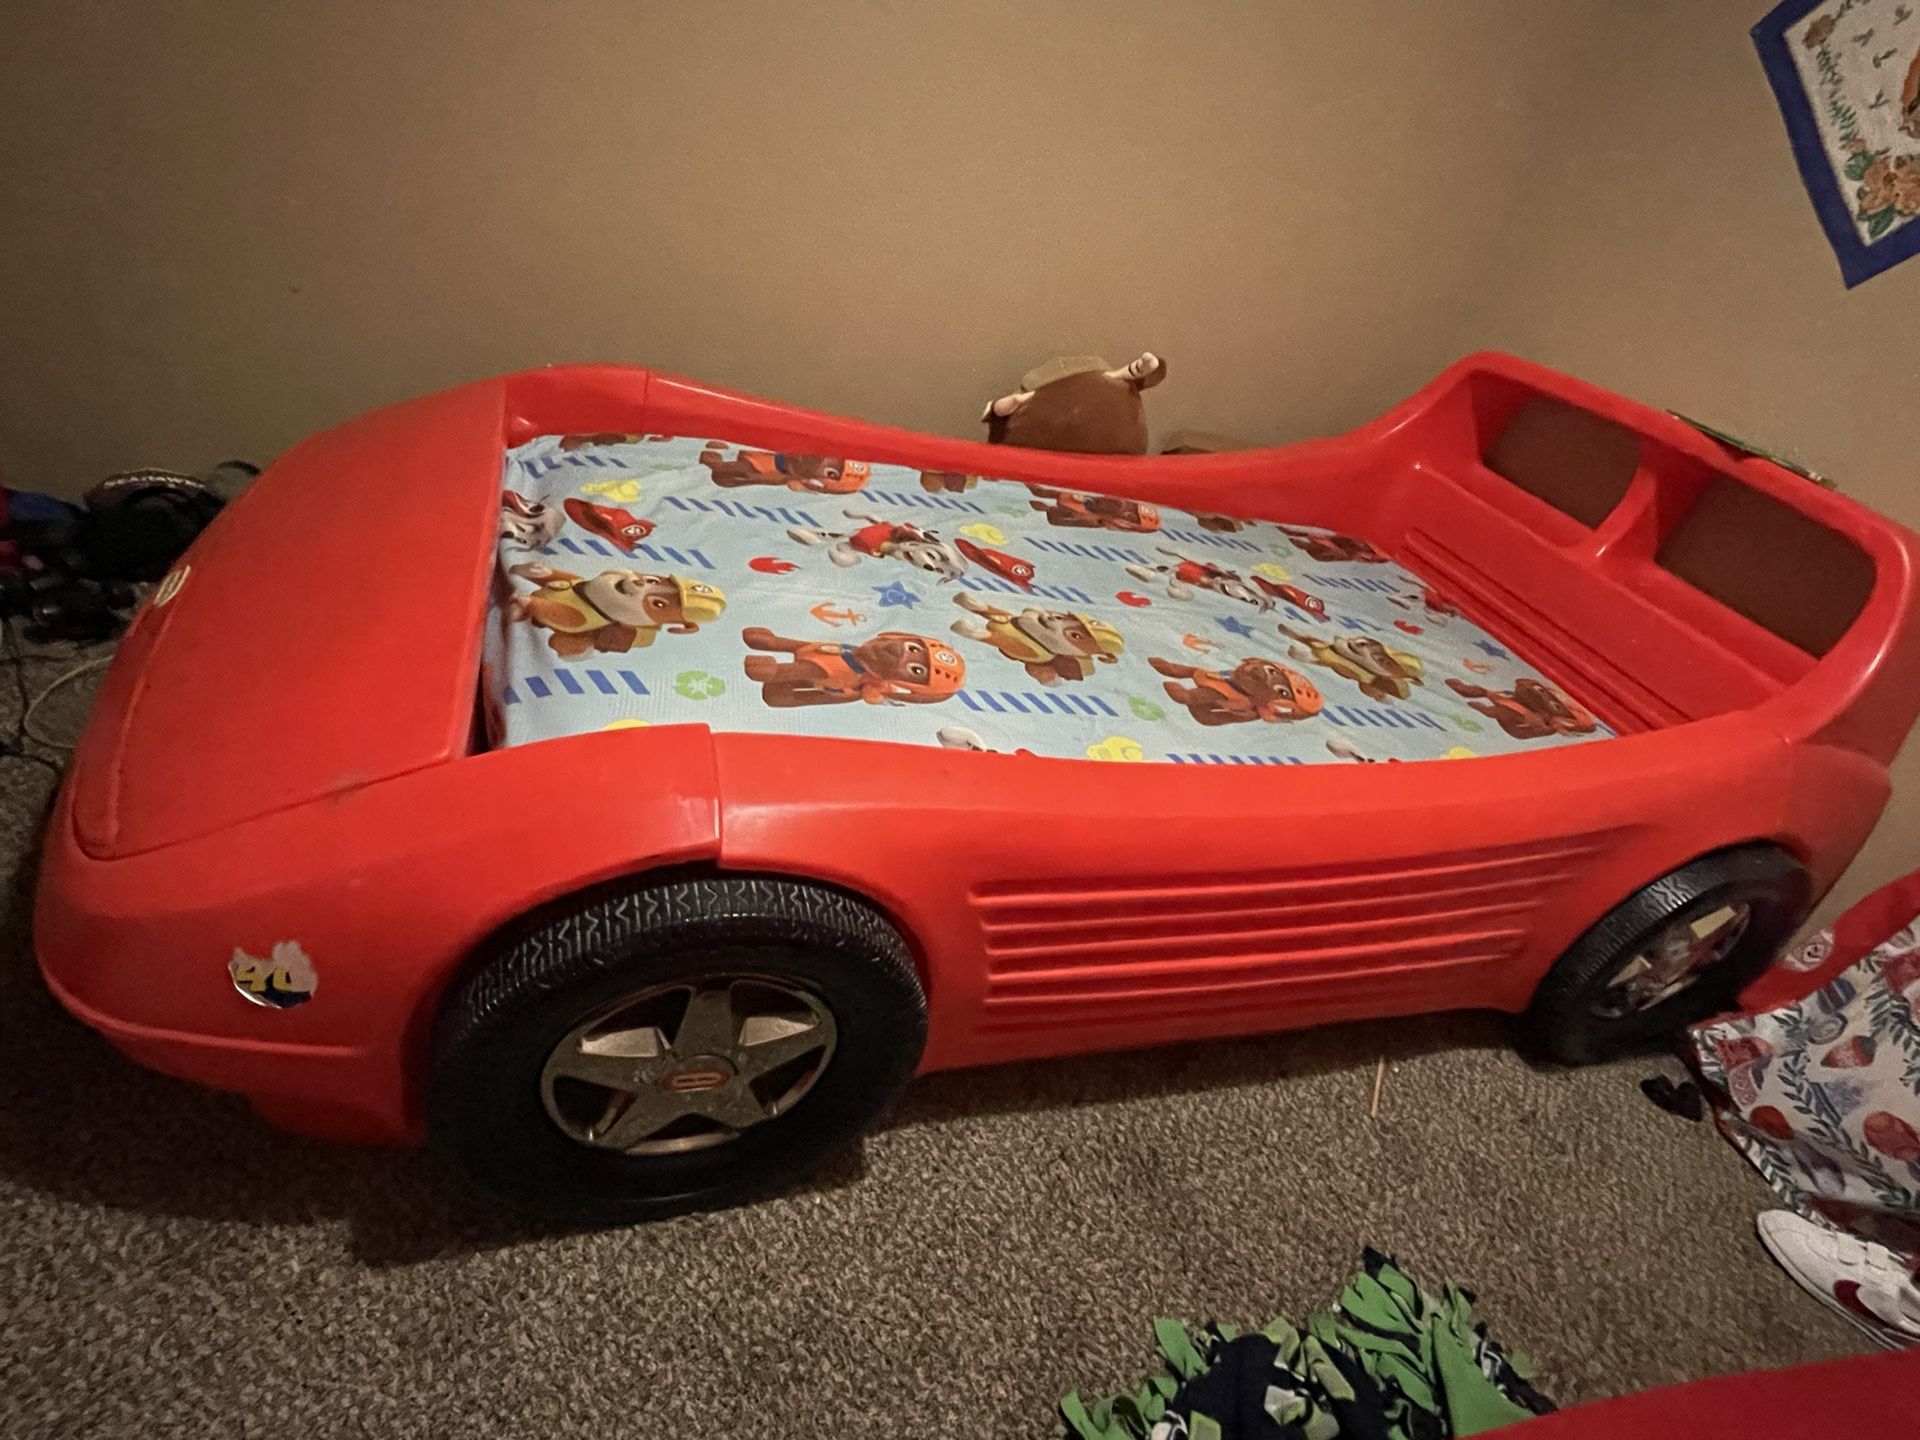 Kids Car Bed Twin with storage